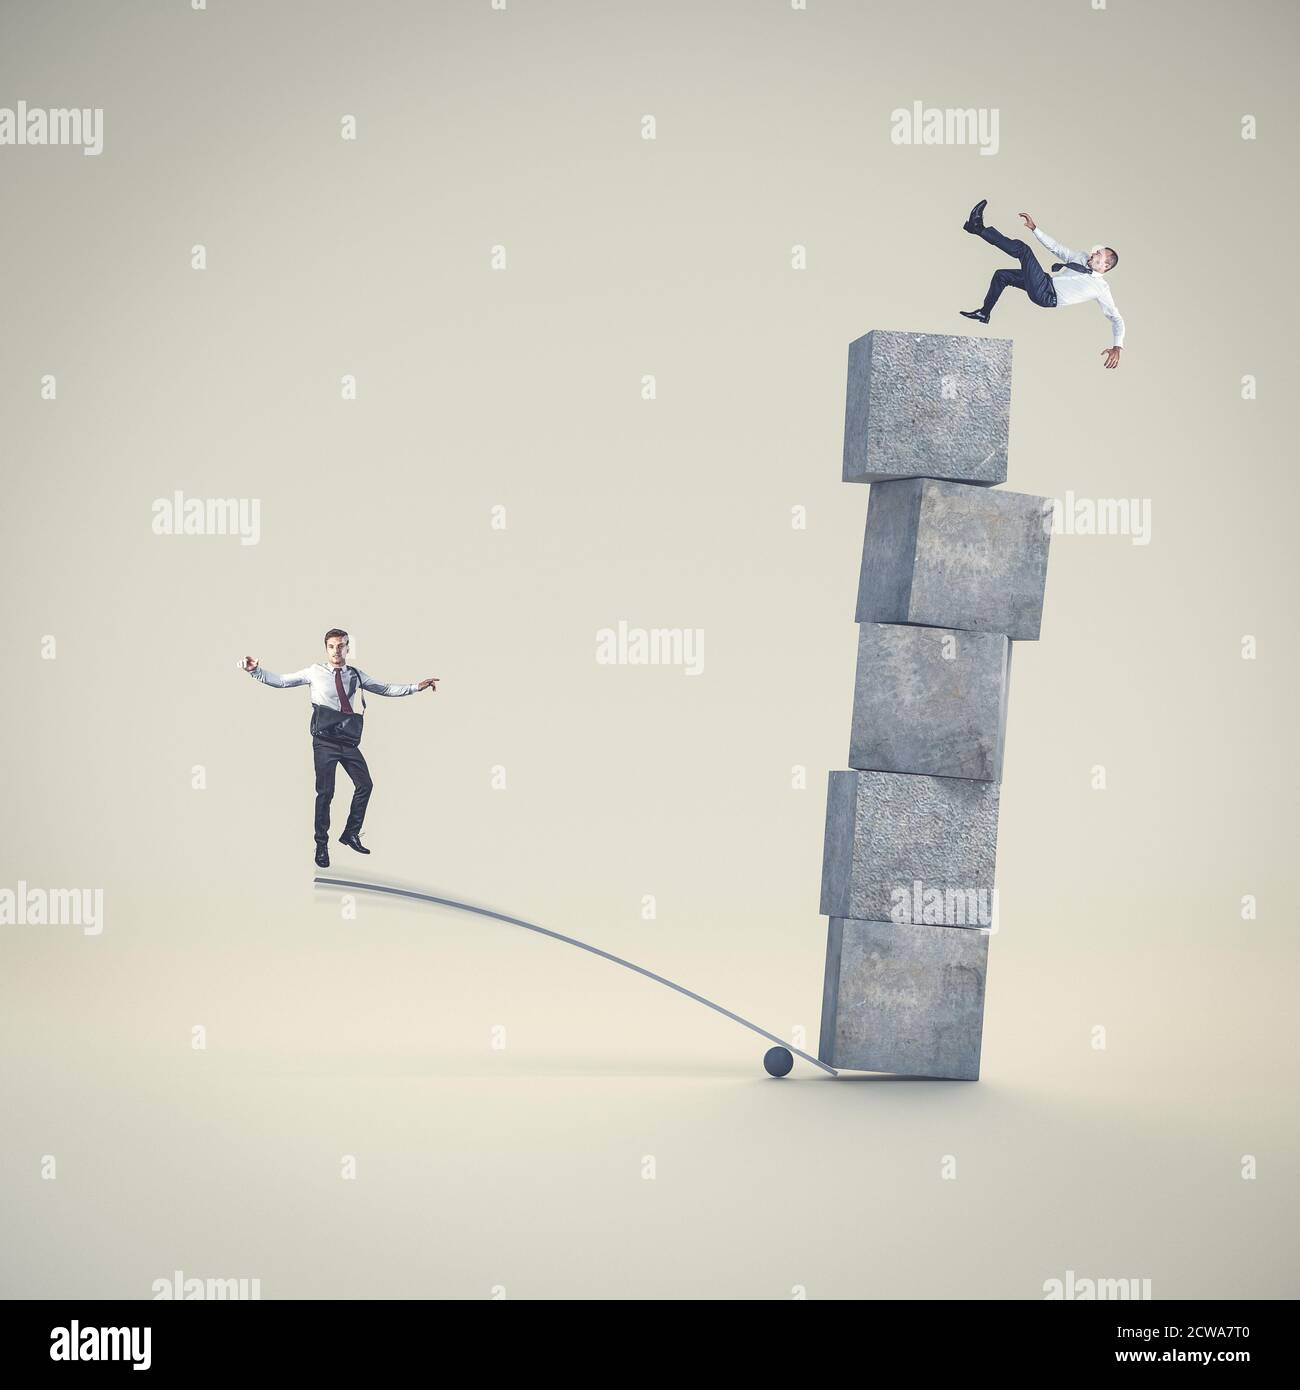 businessman makes his colleague fall from the tower. concept of impropriety and envy in the business world. Stock Photo